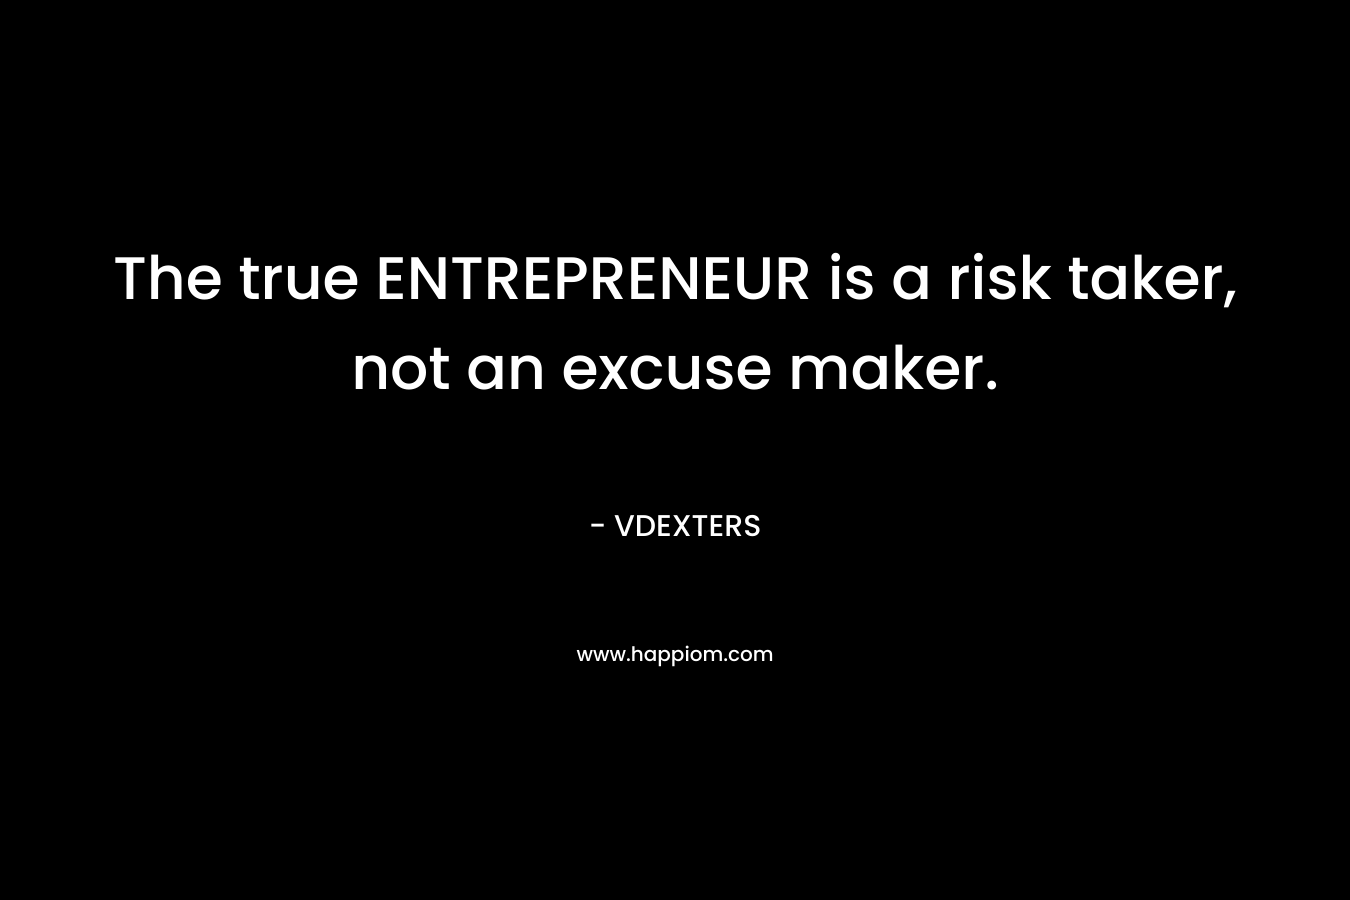 The true ENTREPRENEUR is a risk taker, not an excuse maker. – VDEXTERS